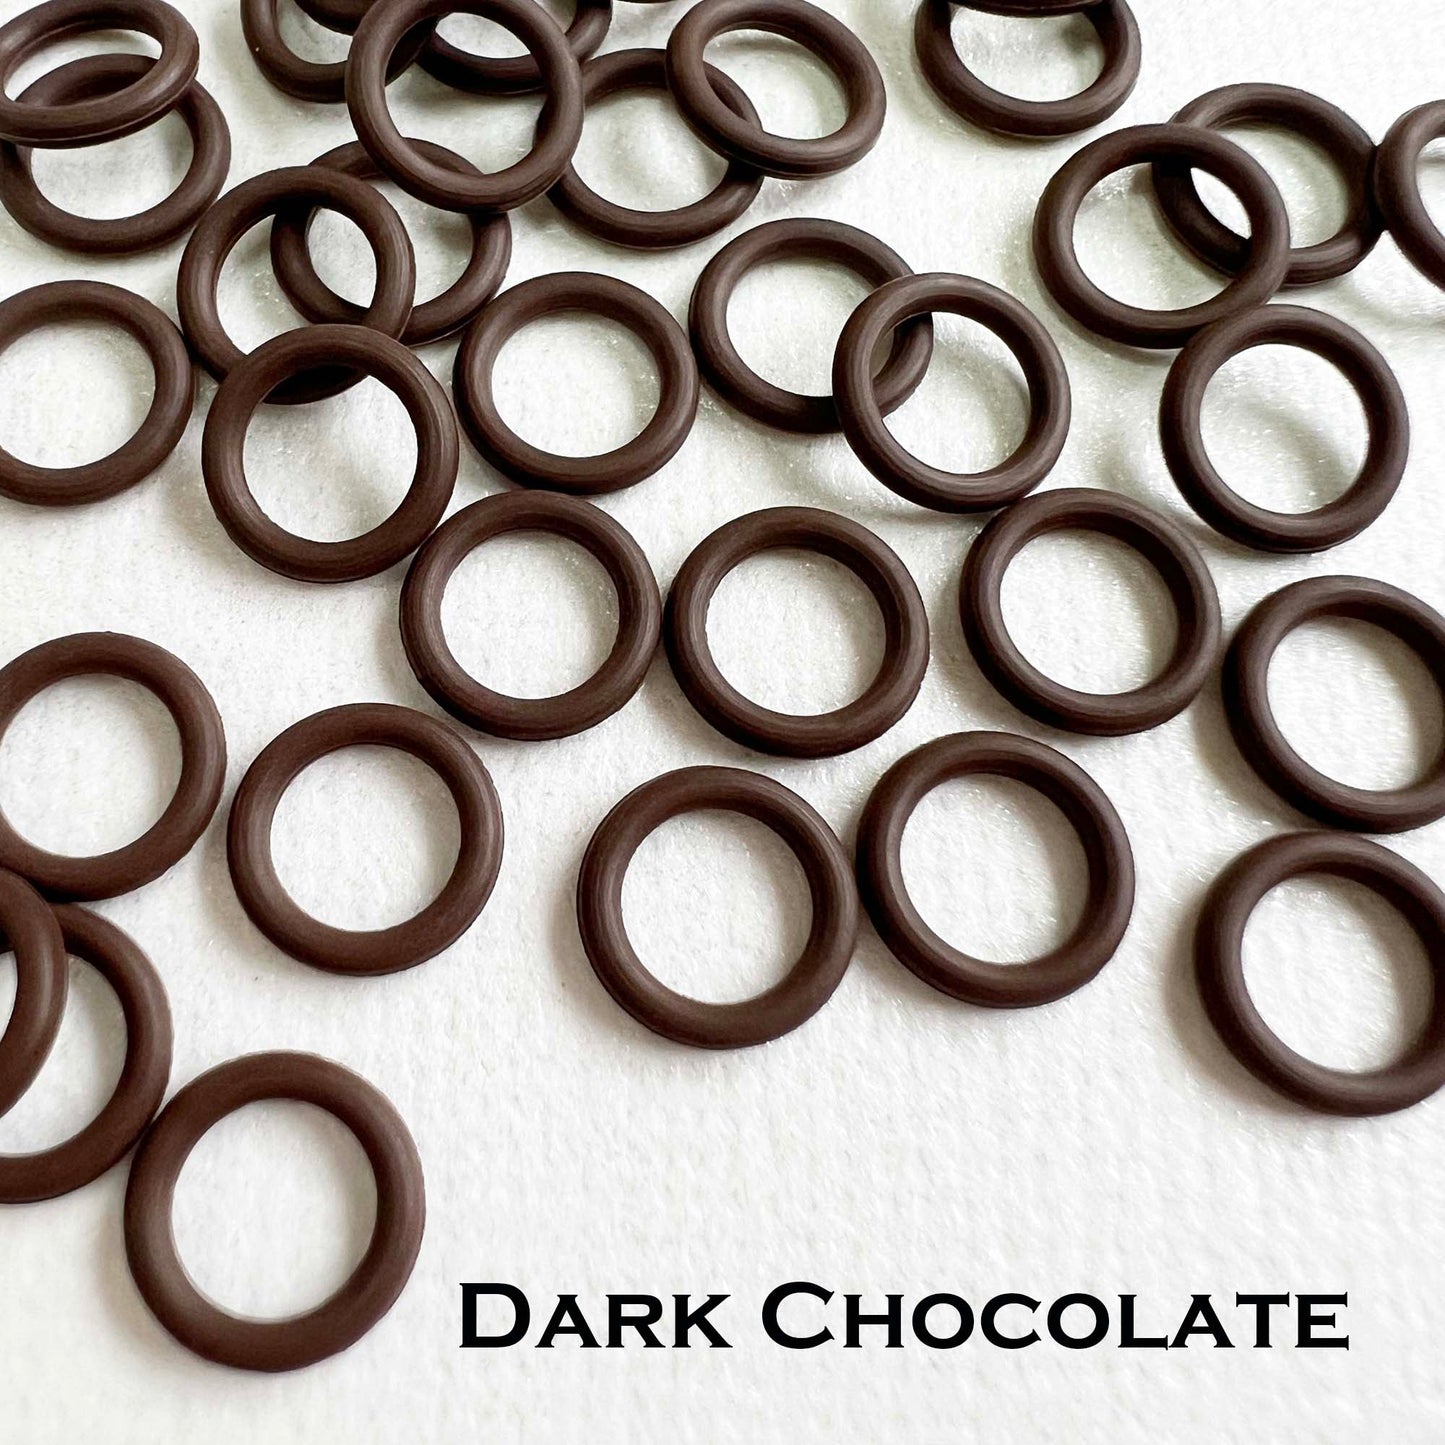 7.4mm Rubber O-Rings (ID: 5mm) - choose color & quantity